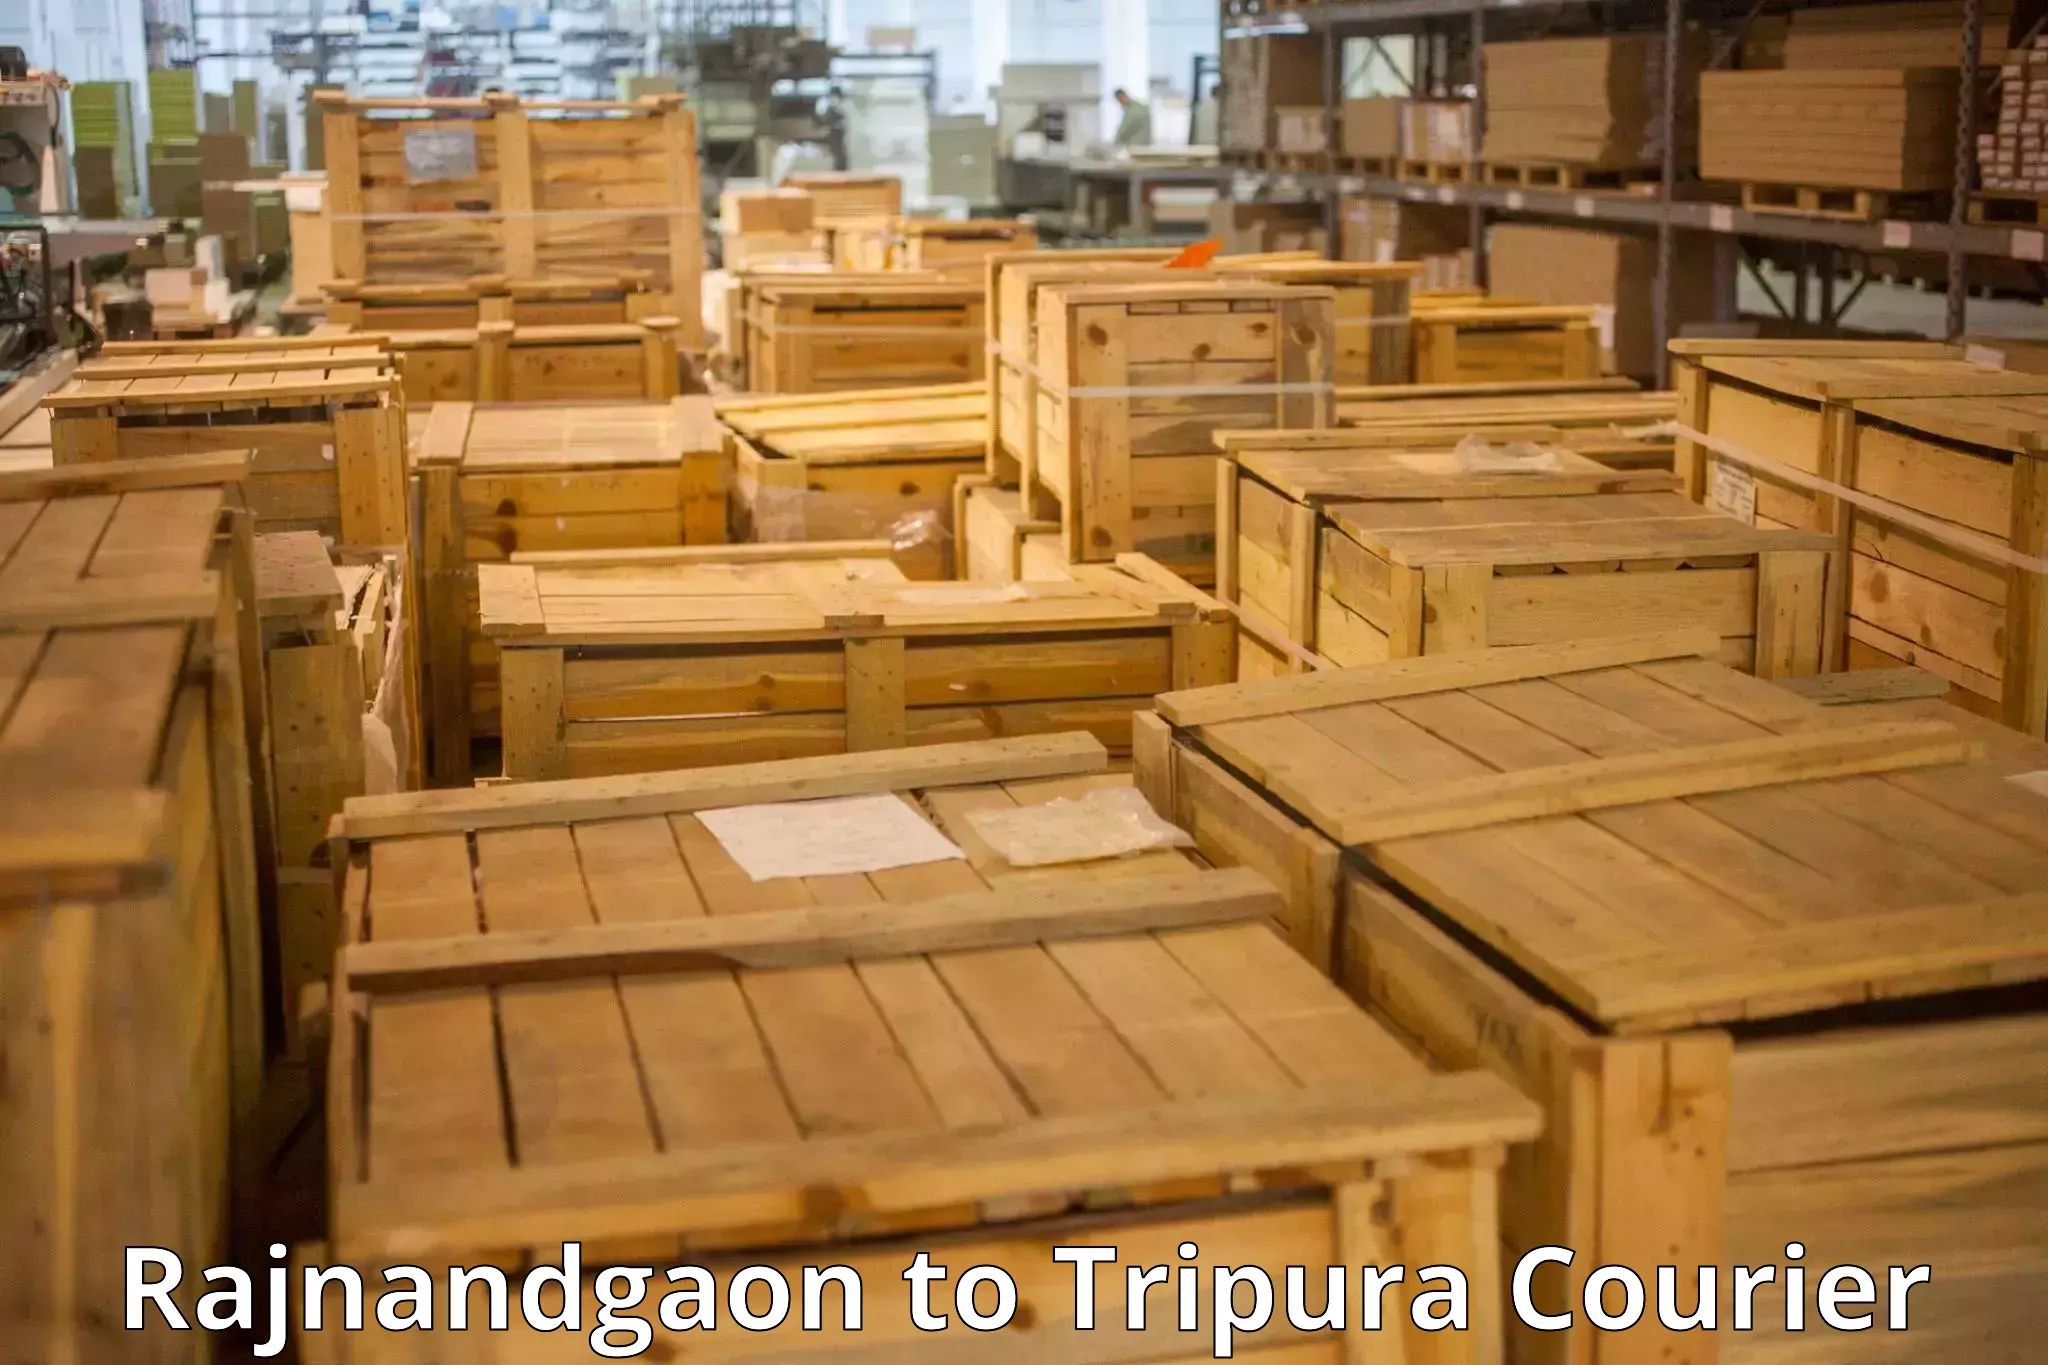 Instant baggage transport quote Rajnandgaon to Udaipur Tripura